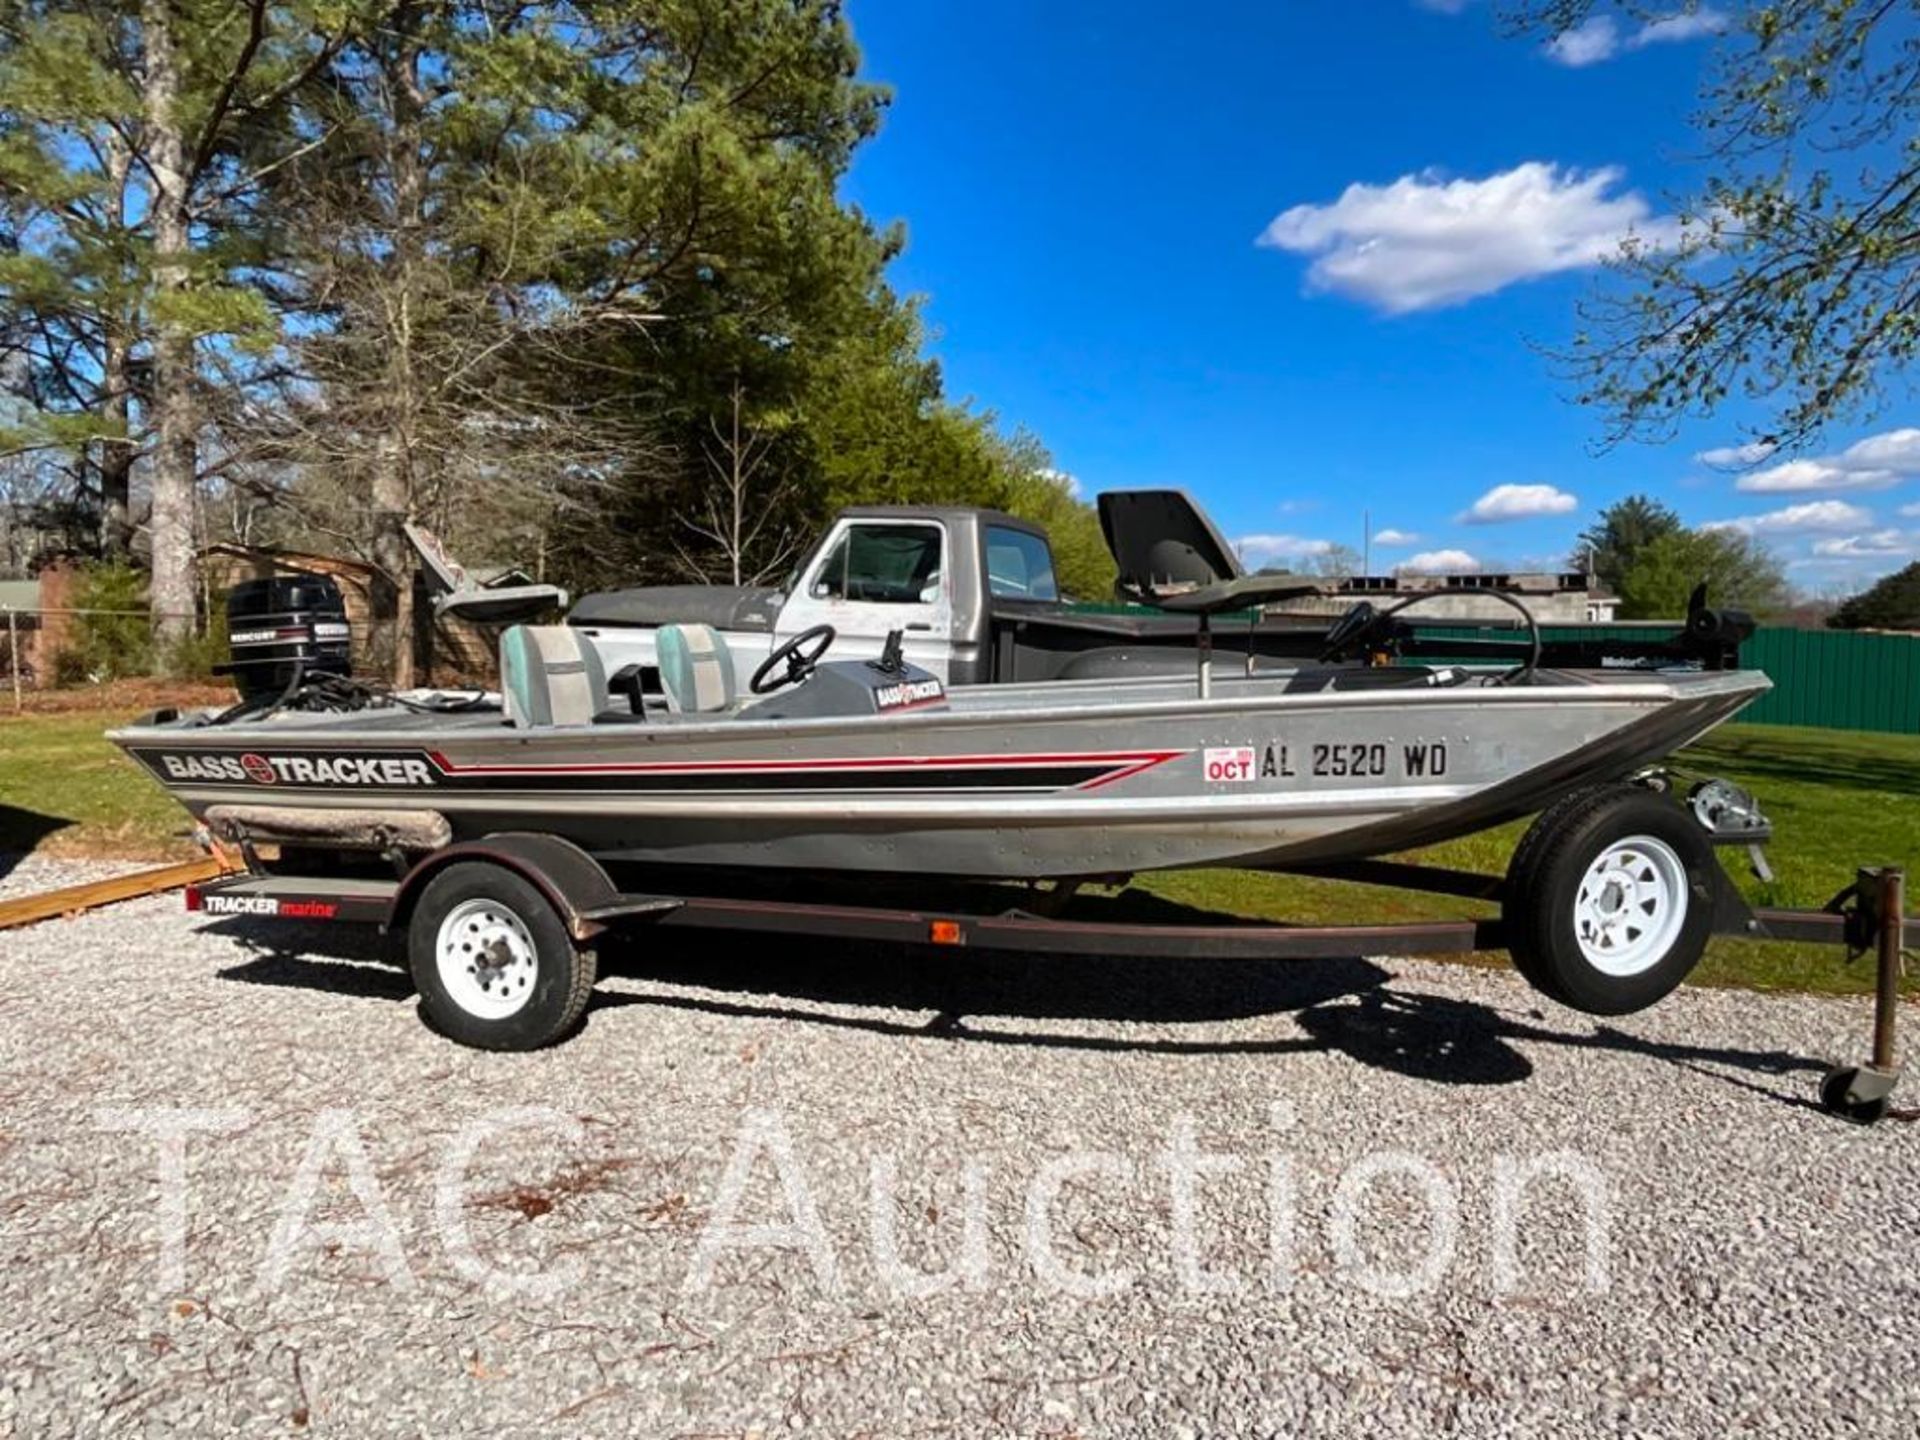 1989 Bass Tracker 17ft Bass Boat W/ Trailer - Image 8 of 52